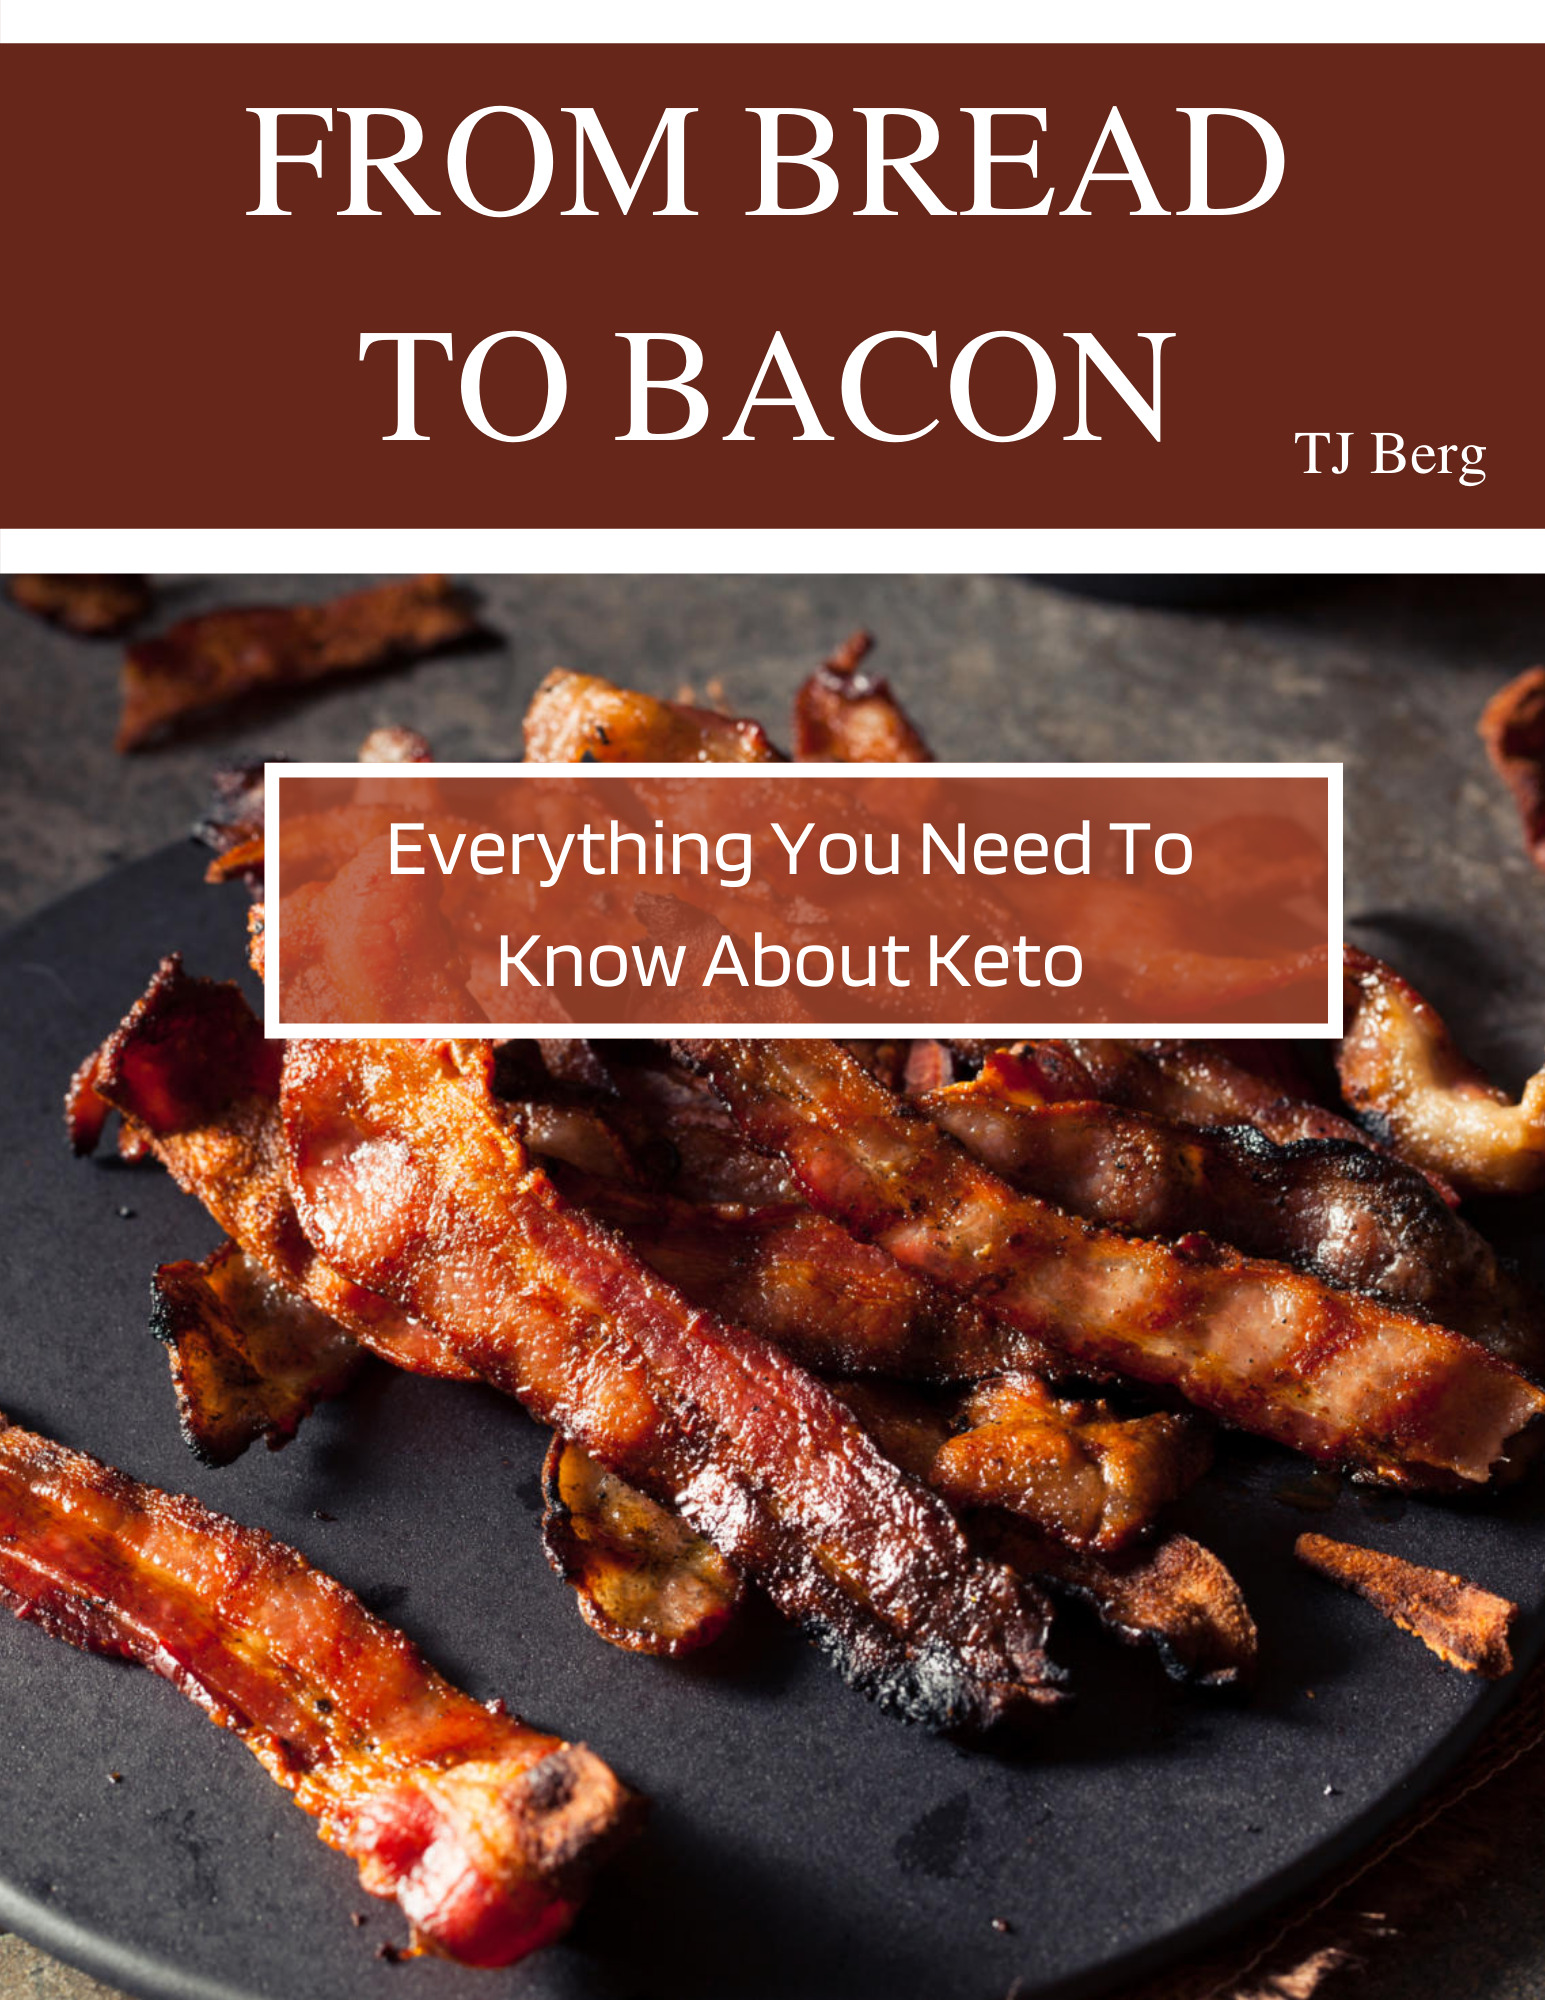 FREE: From Bread to Bacon: Everything You Need to Know About Keto by TJ Berg